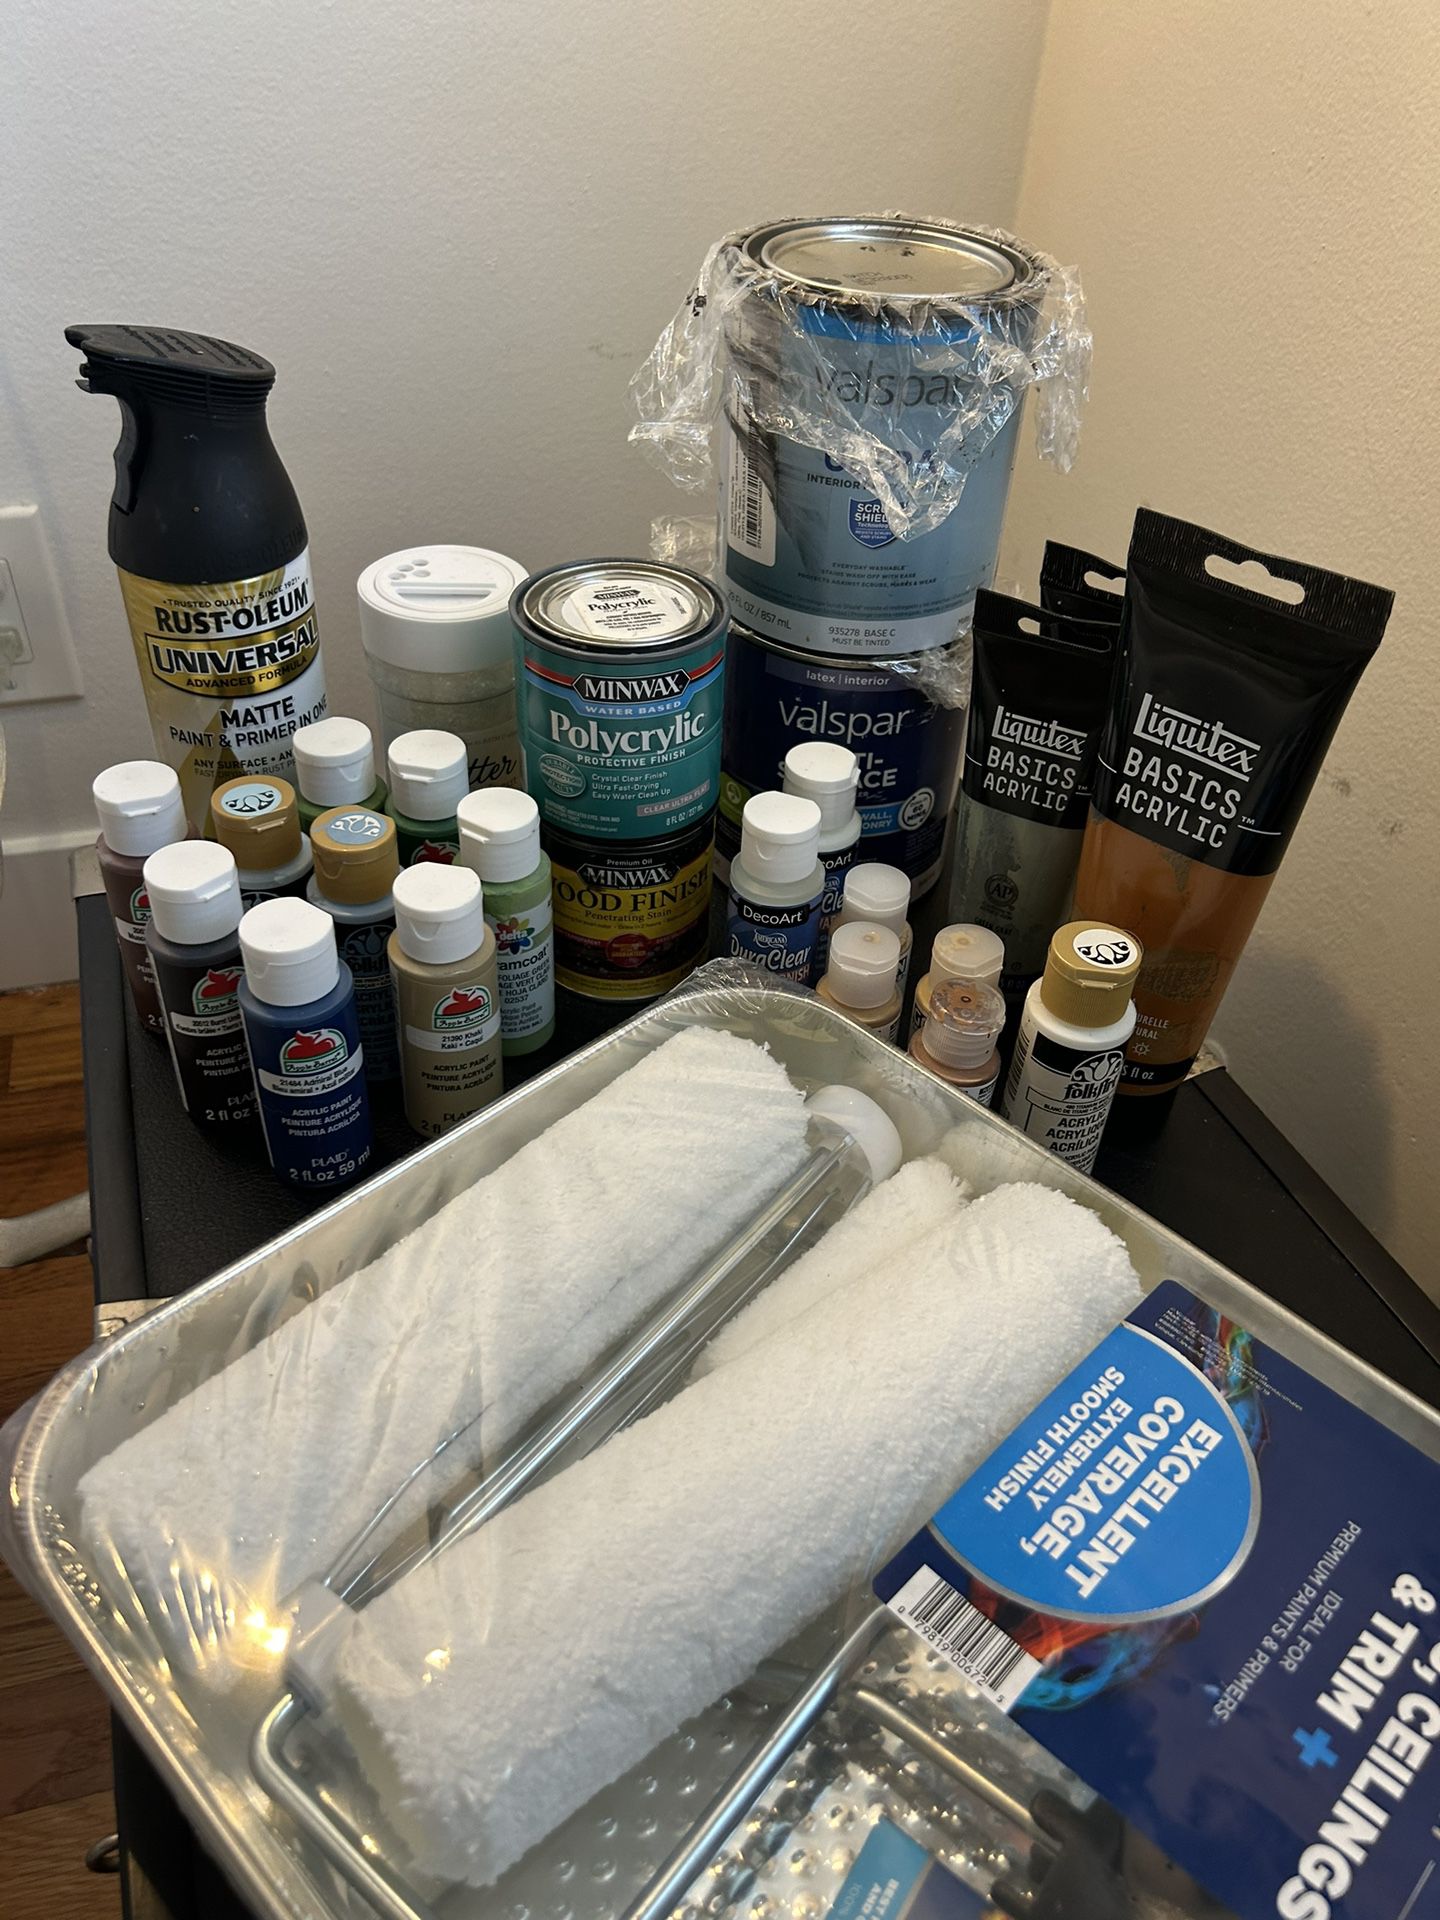 Miscellaneous Painting, Wood Staining, And Crafting Supplies